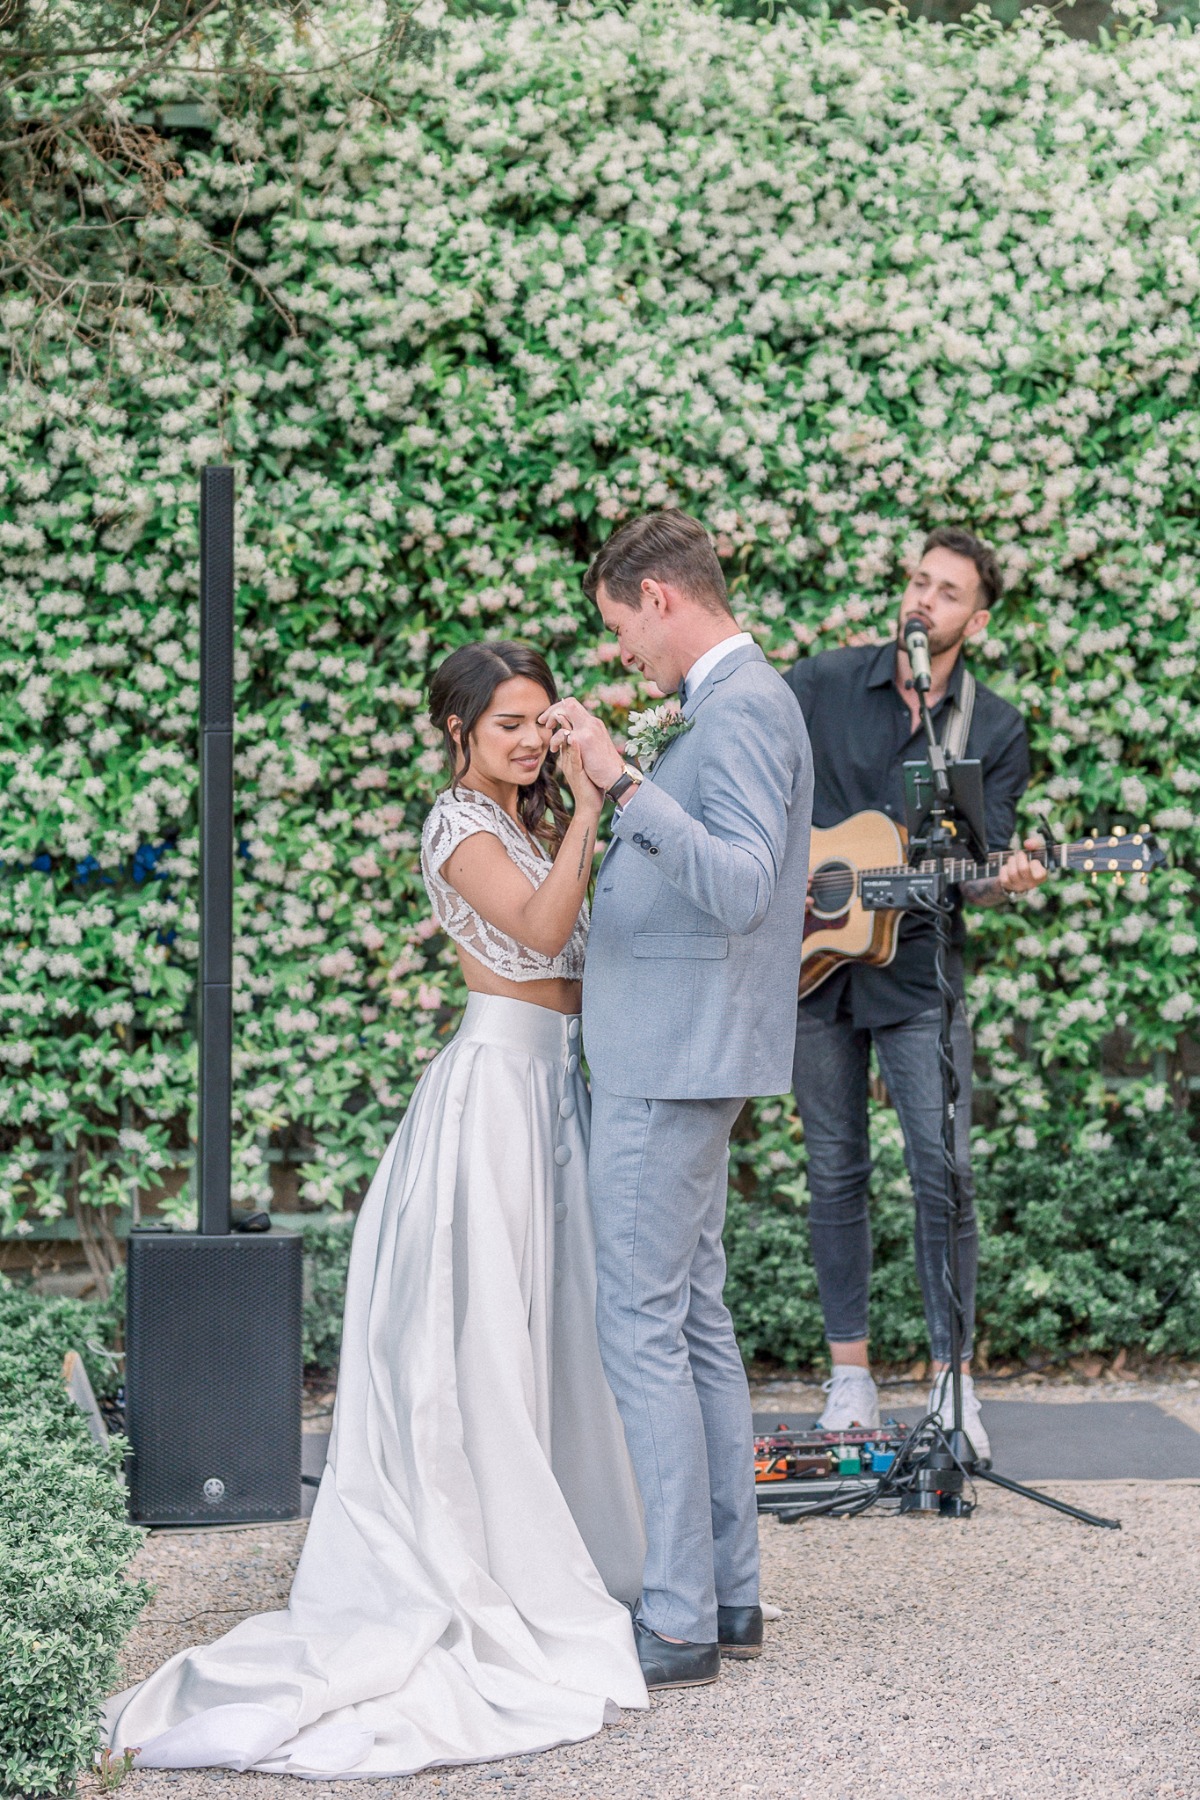 Bride and groom dancing in front of guitar player